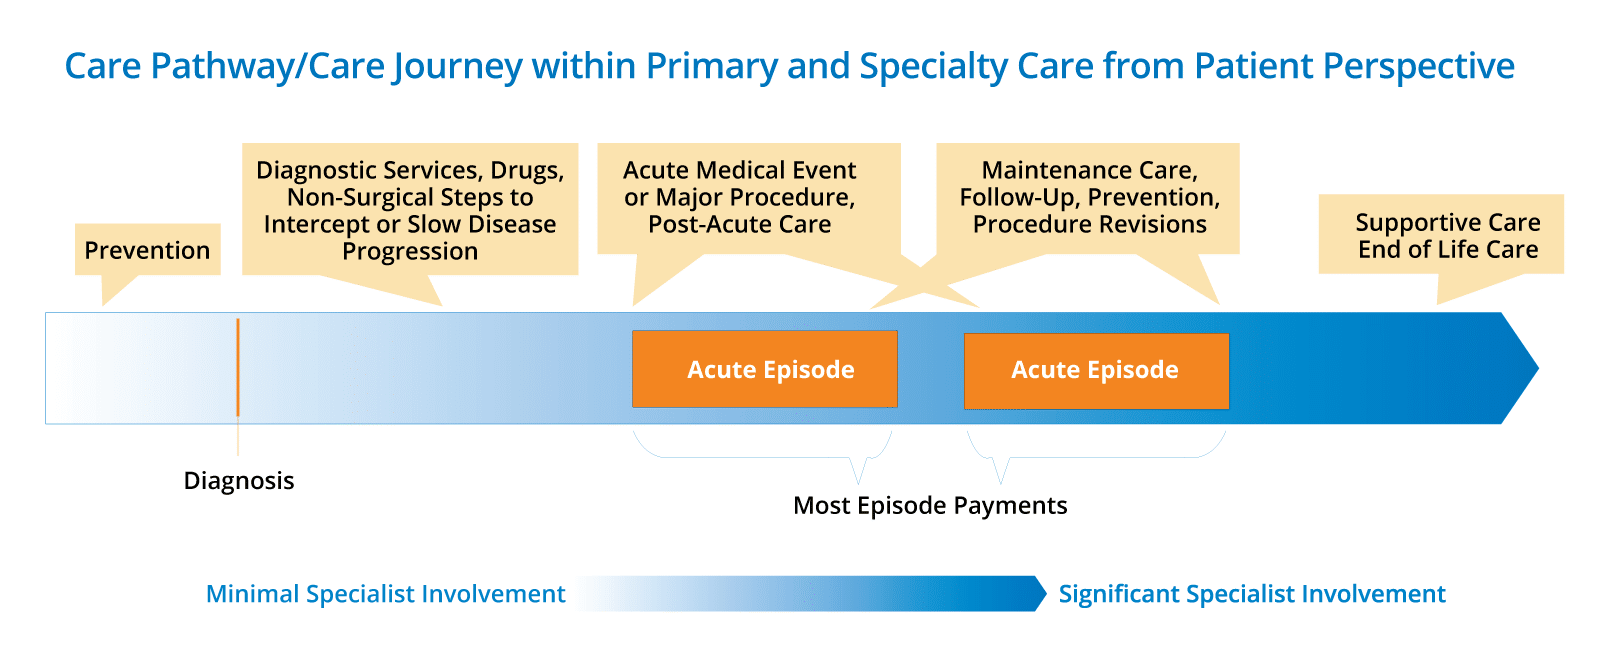 Care Pathway/Care Journey within Primary and Specialty Care from Patient Perspective